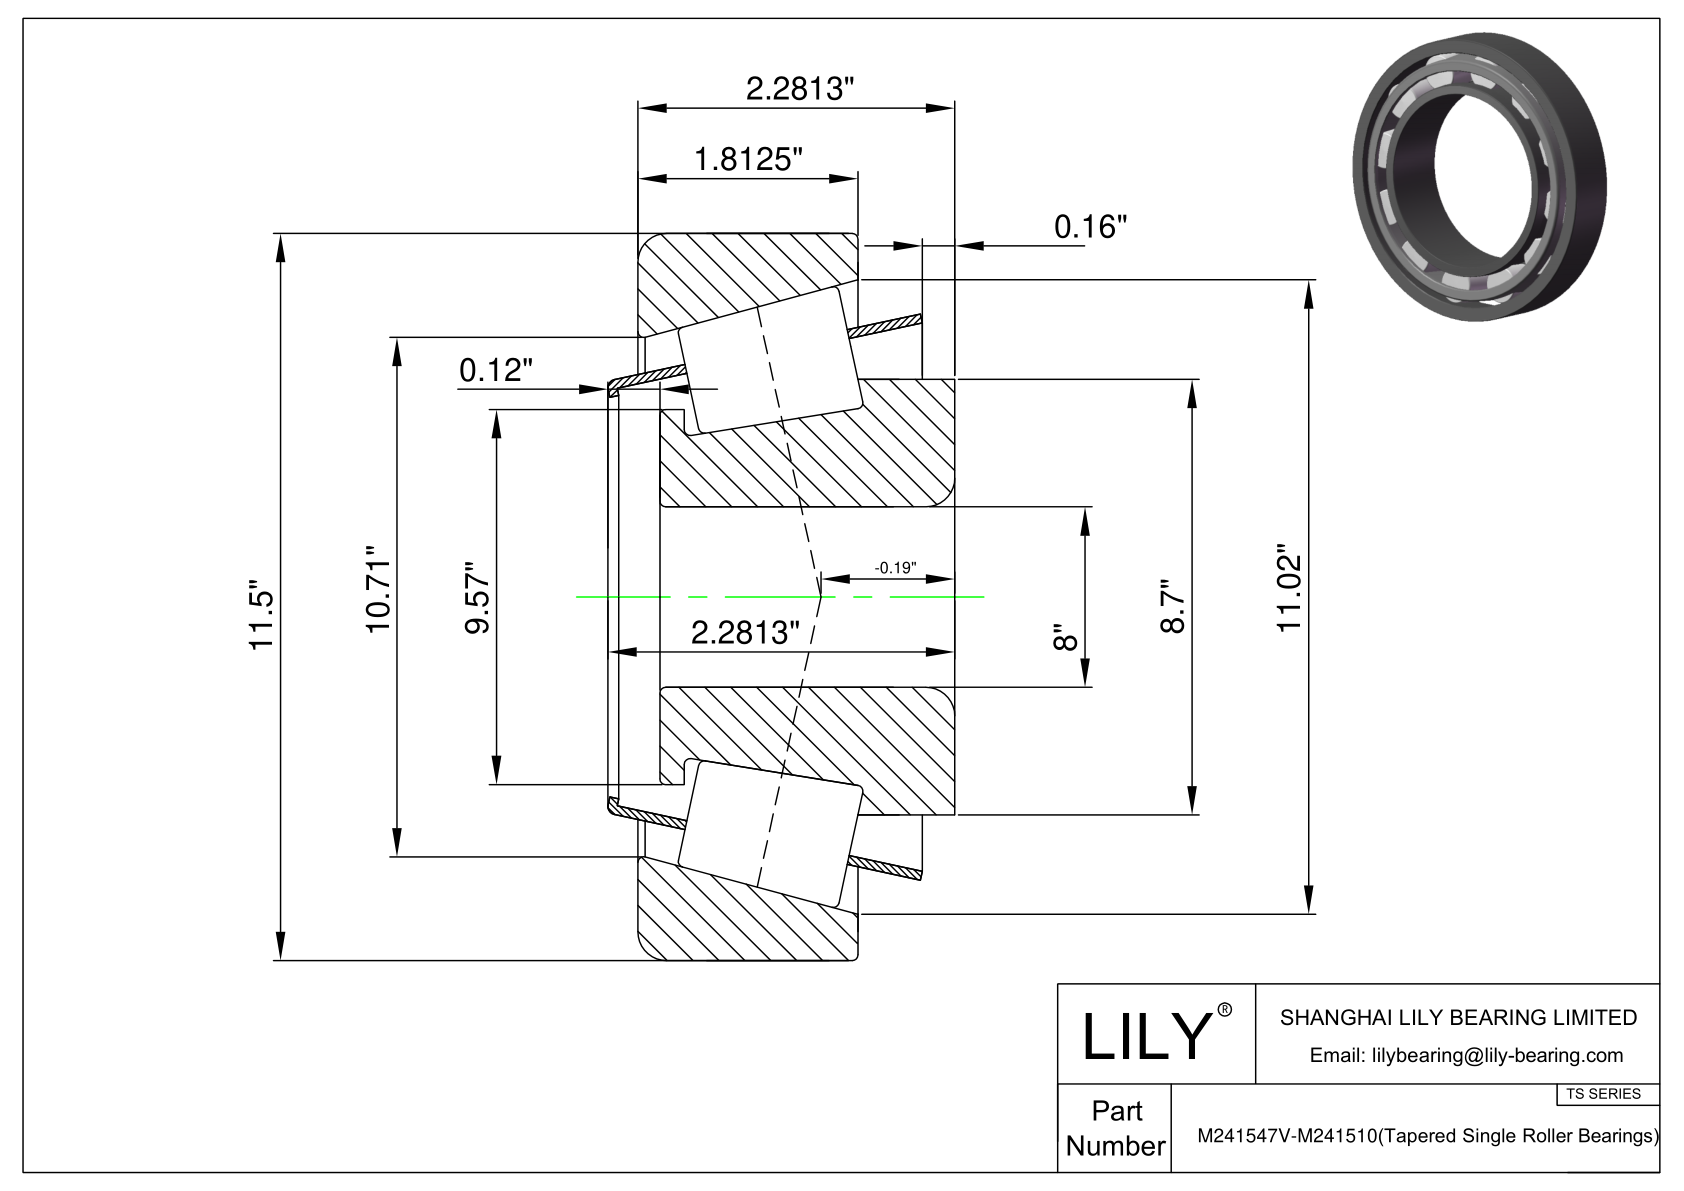 M241547V-M241510 TS (Tapered Single Roller Bearings) (Imperial) cad drawing